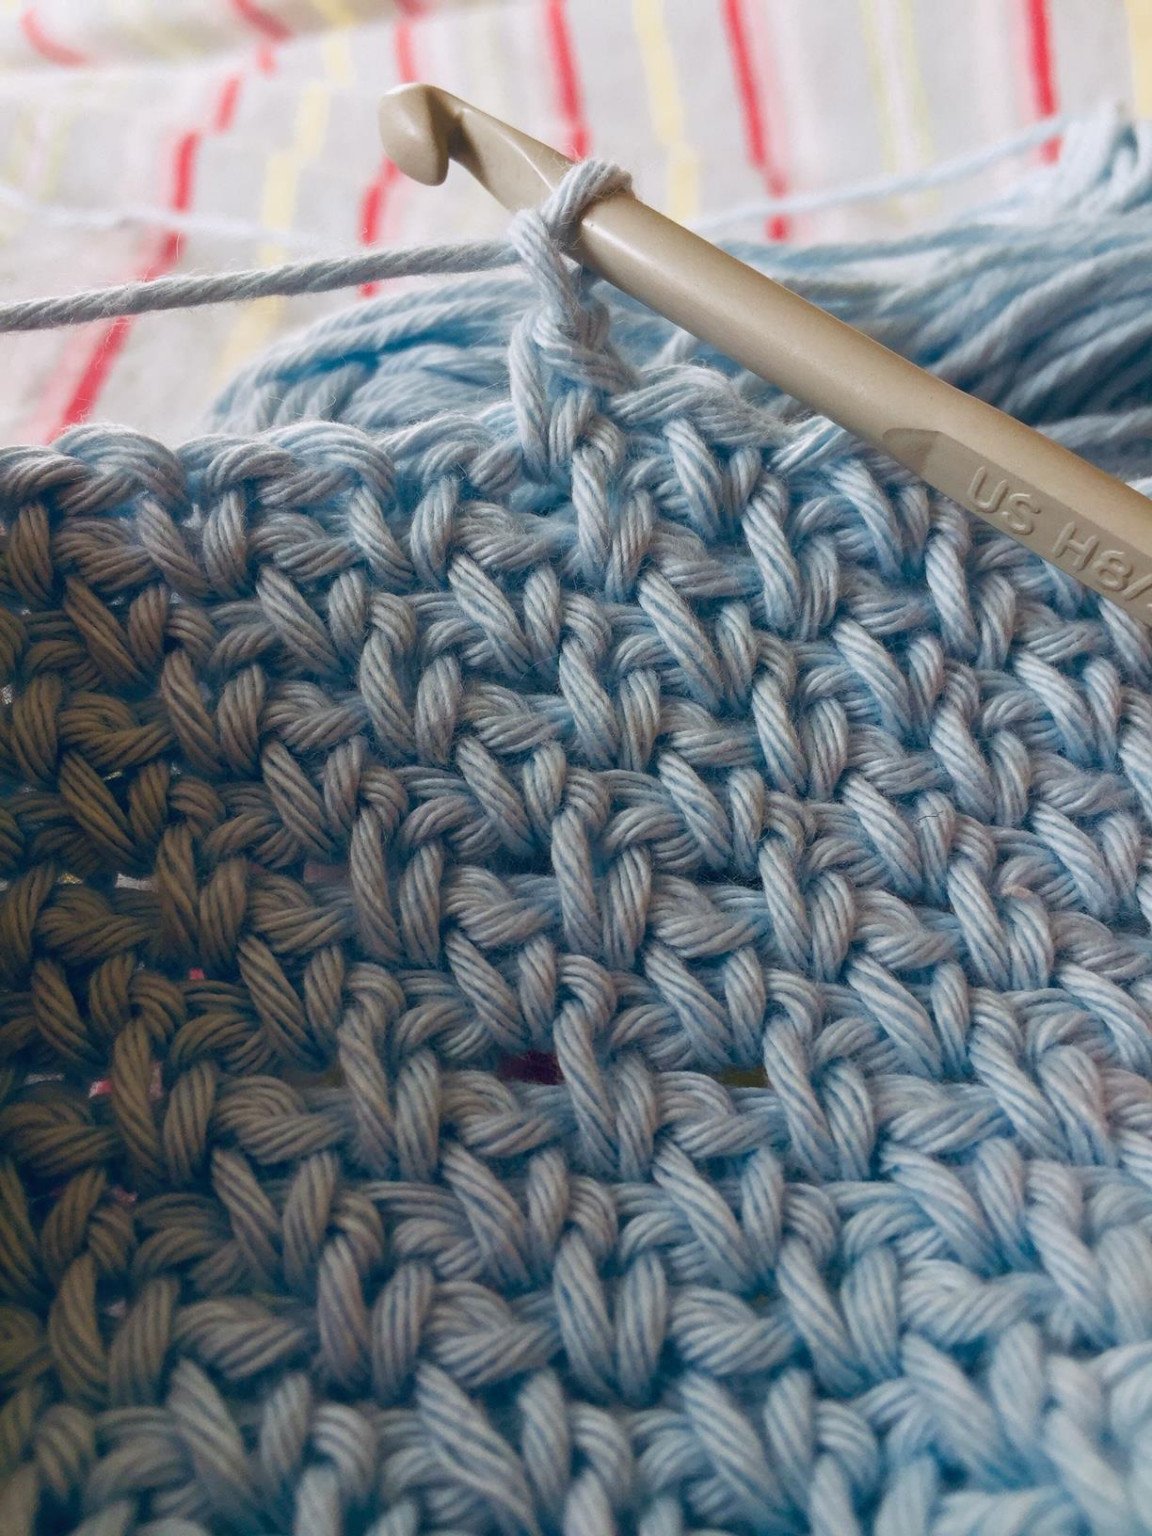 Beginners Crochet with Denise - Stitch & Knit